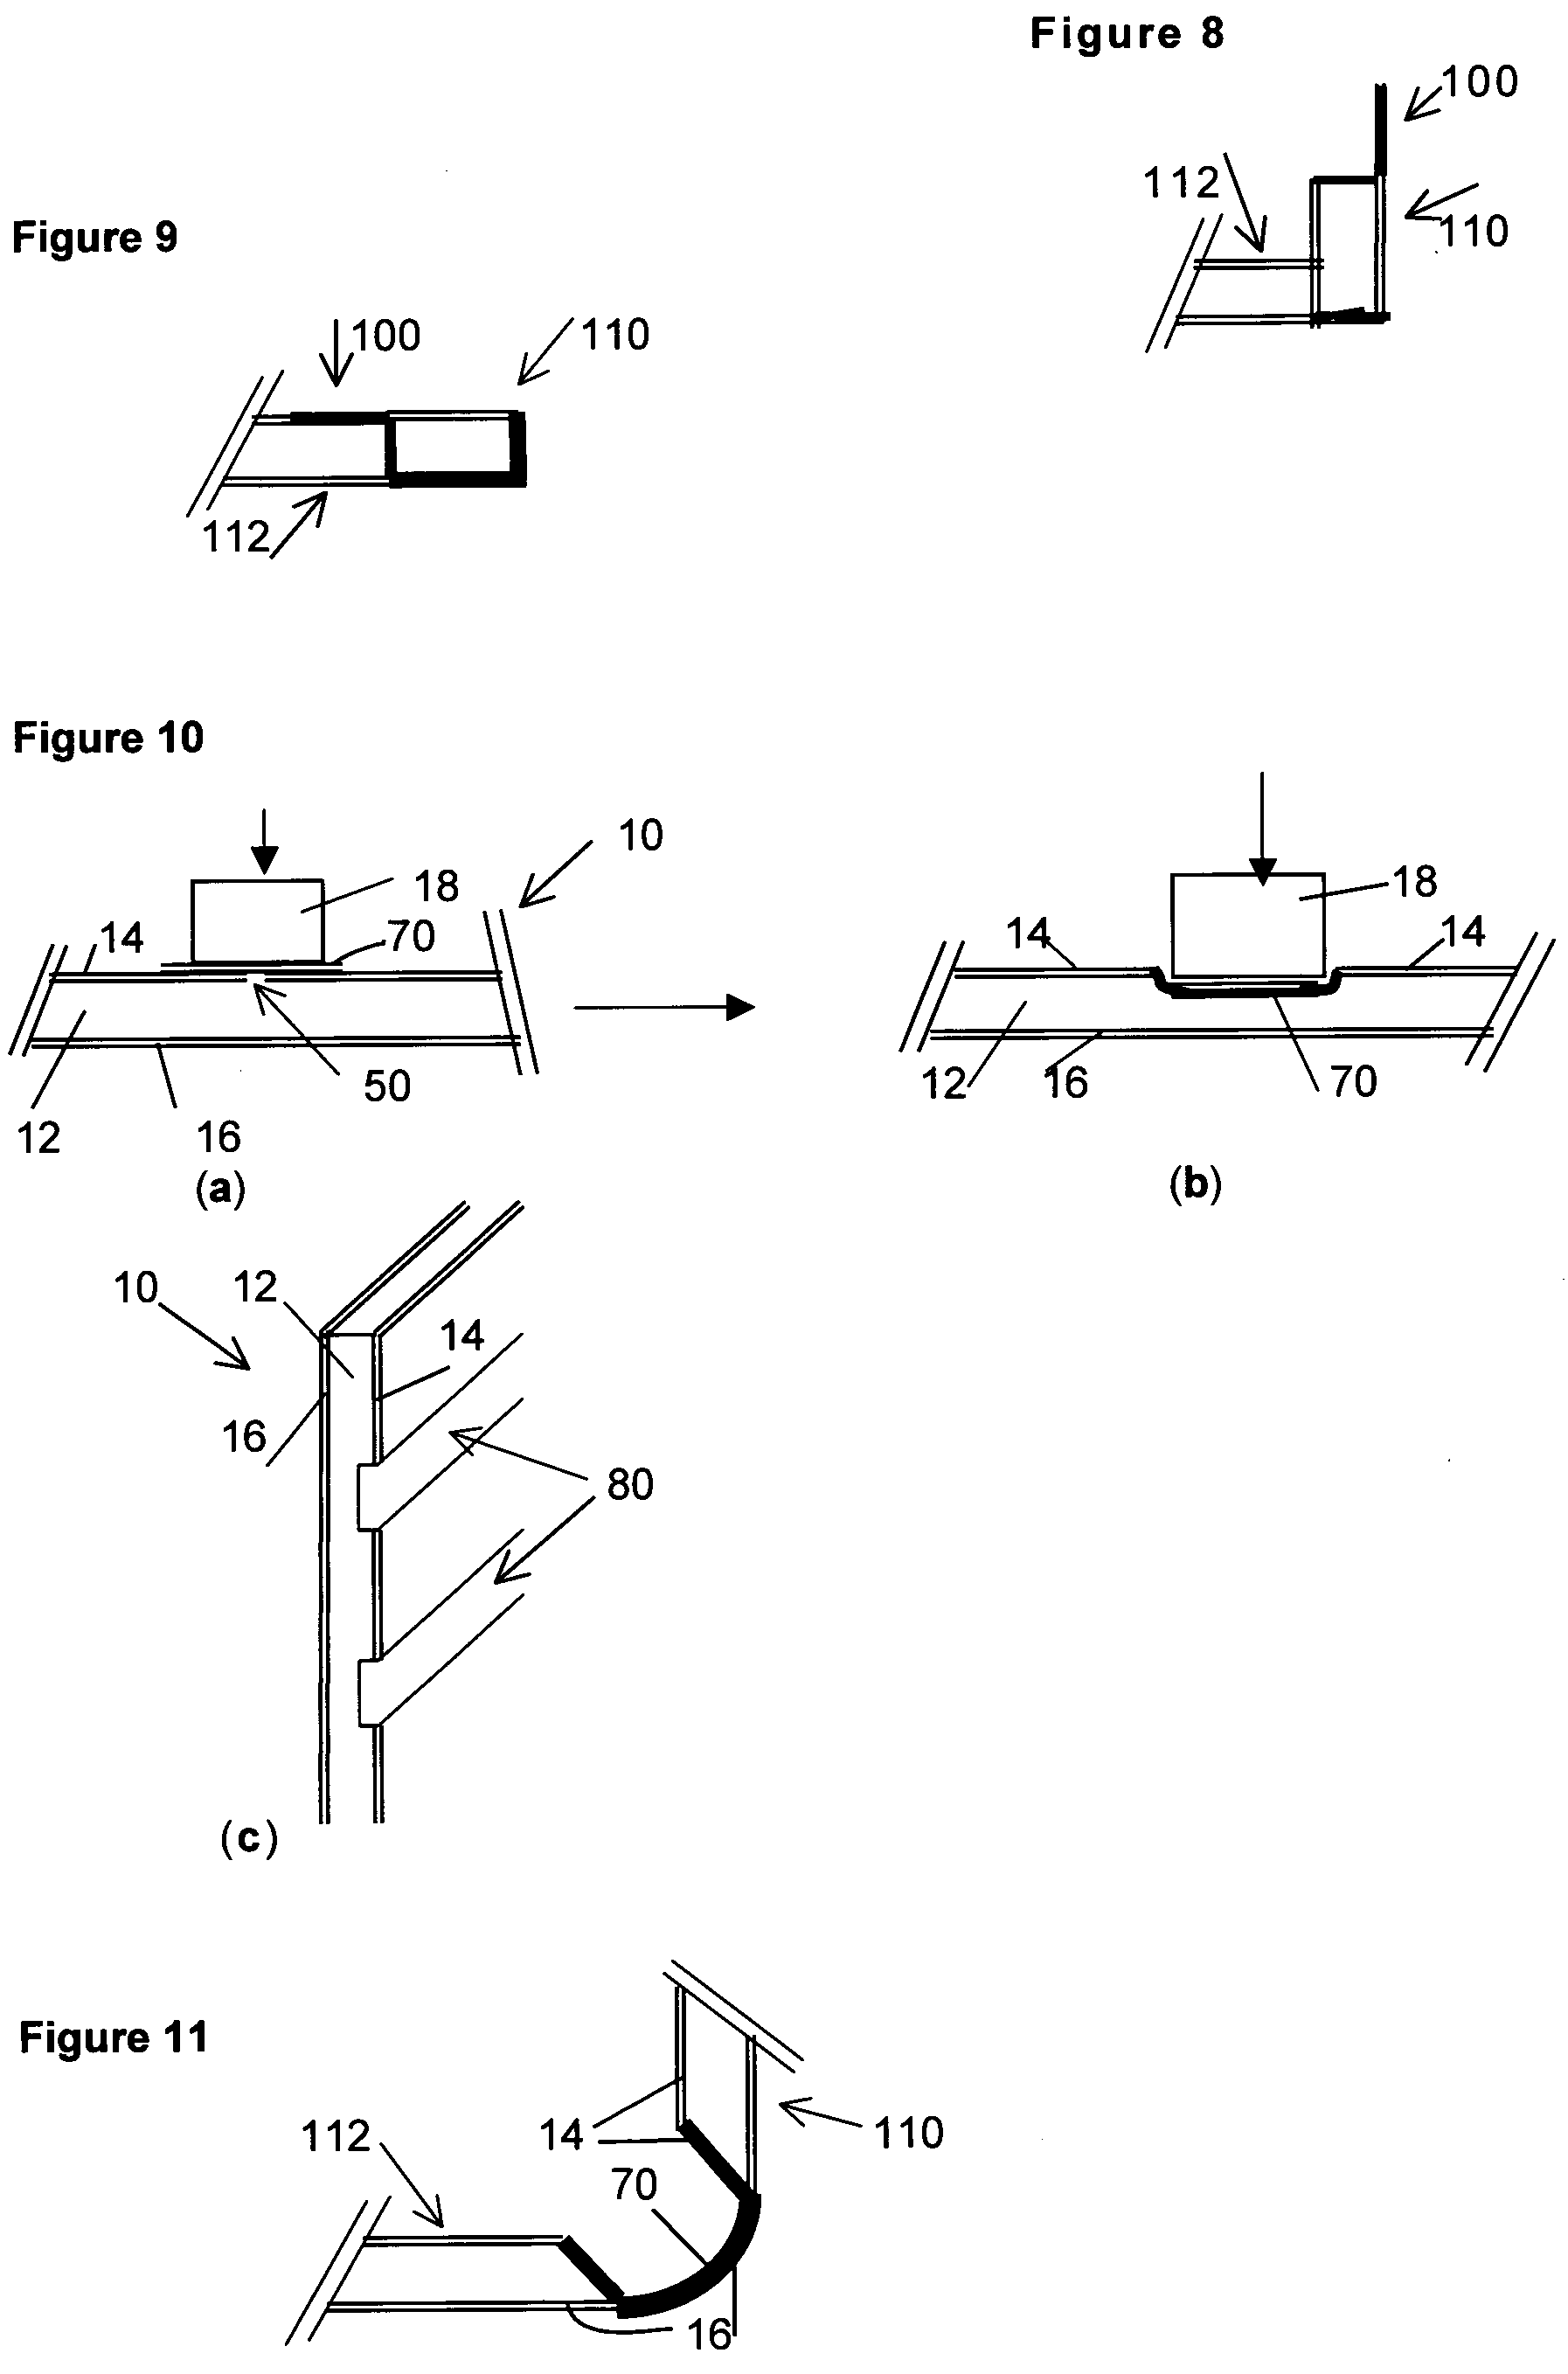 Method for Manufacturing a Composite Construction Element